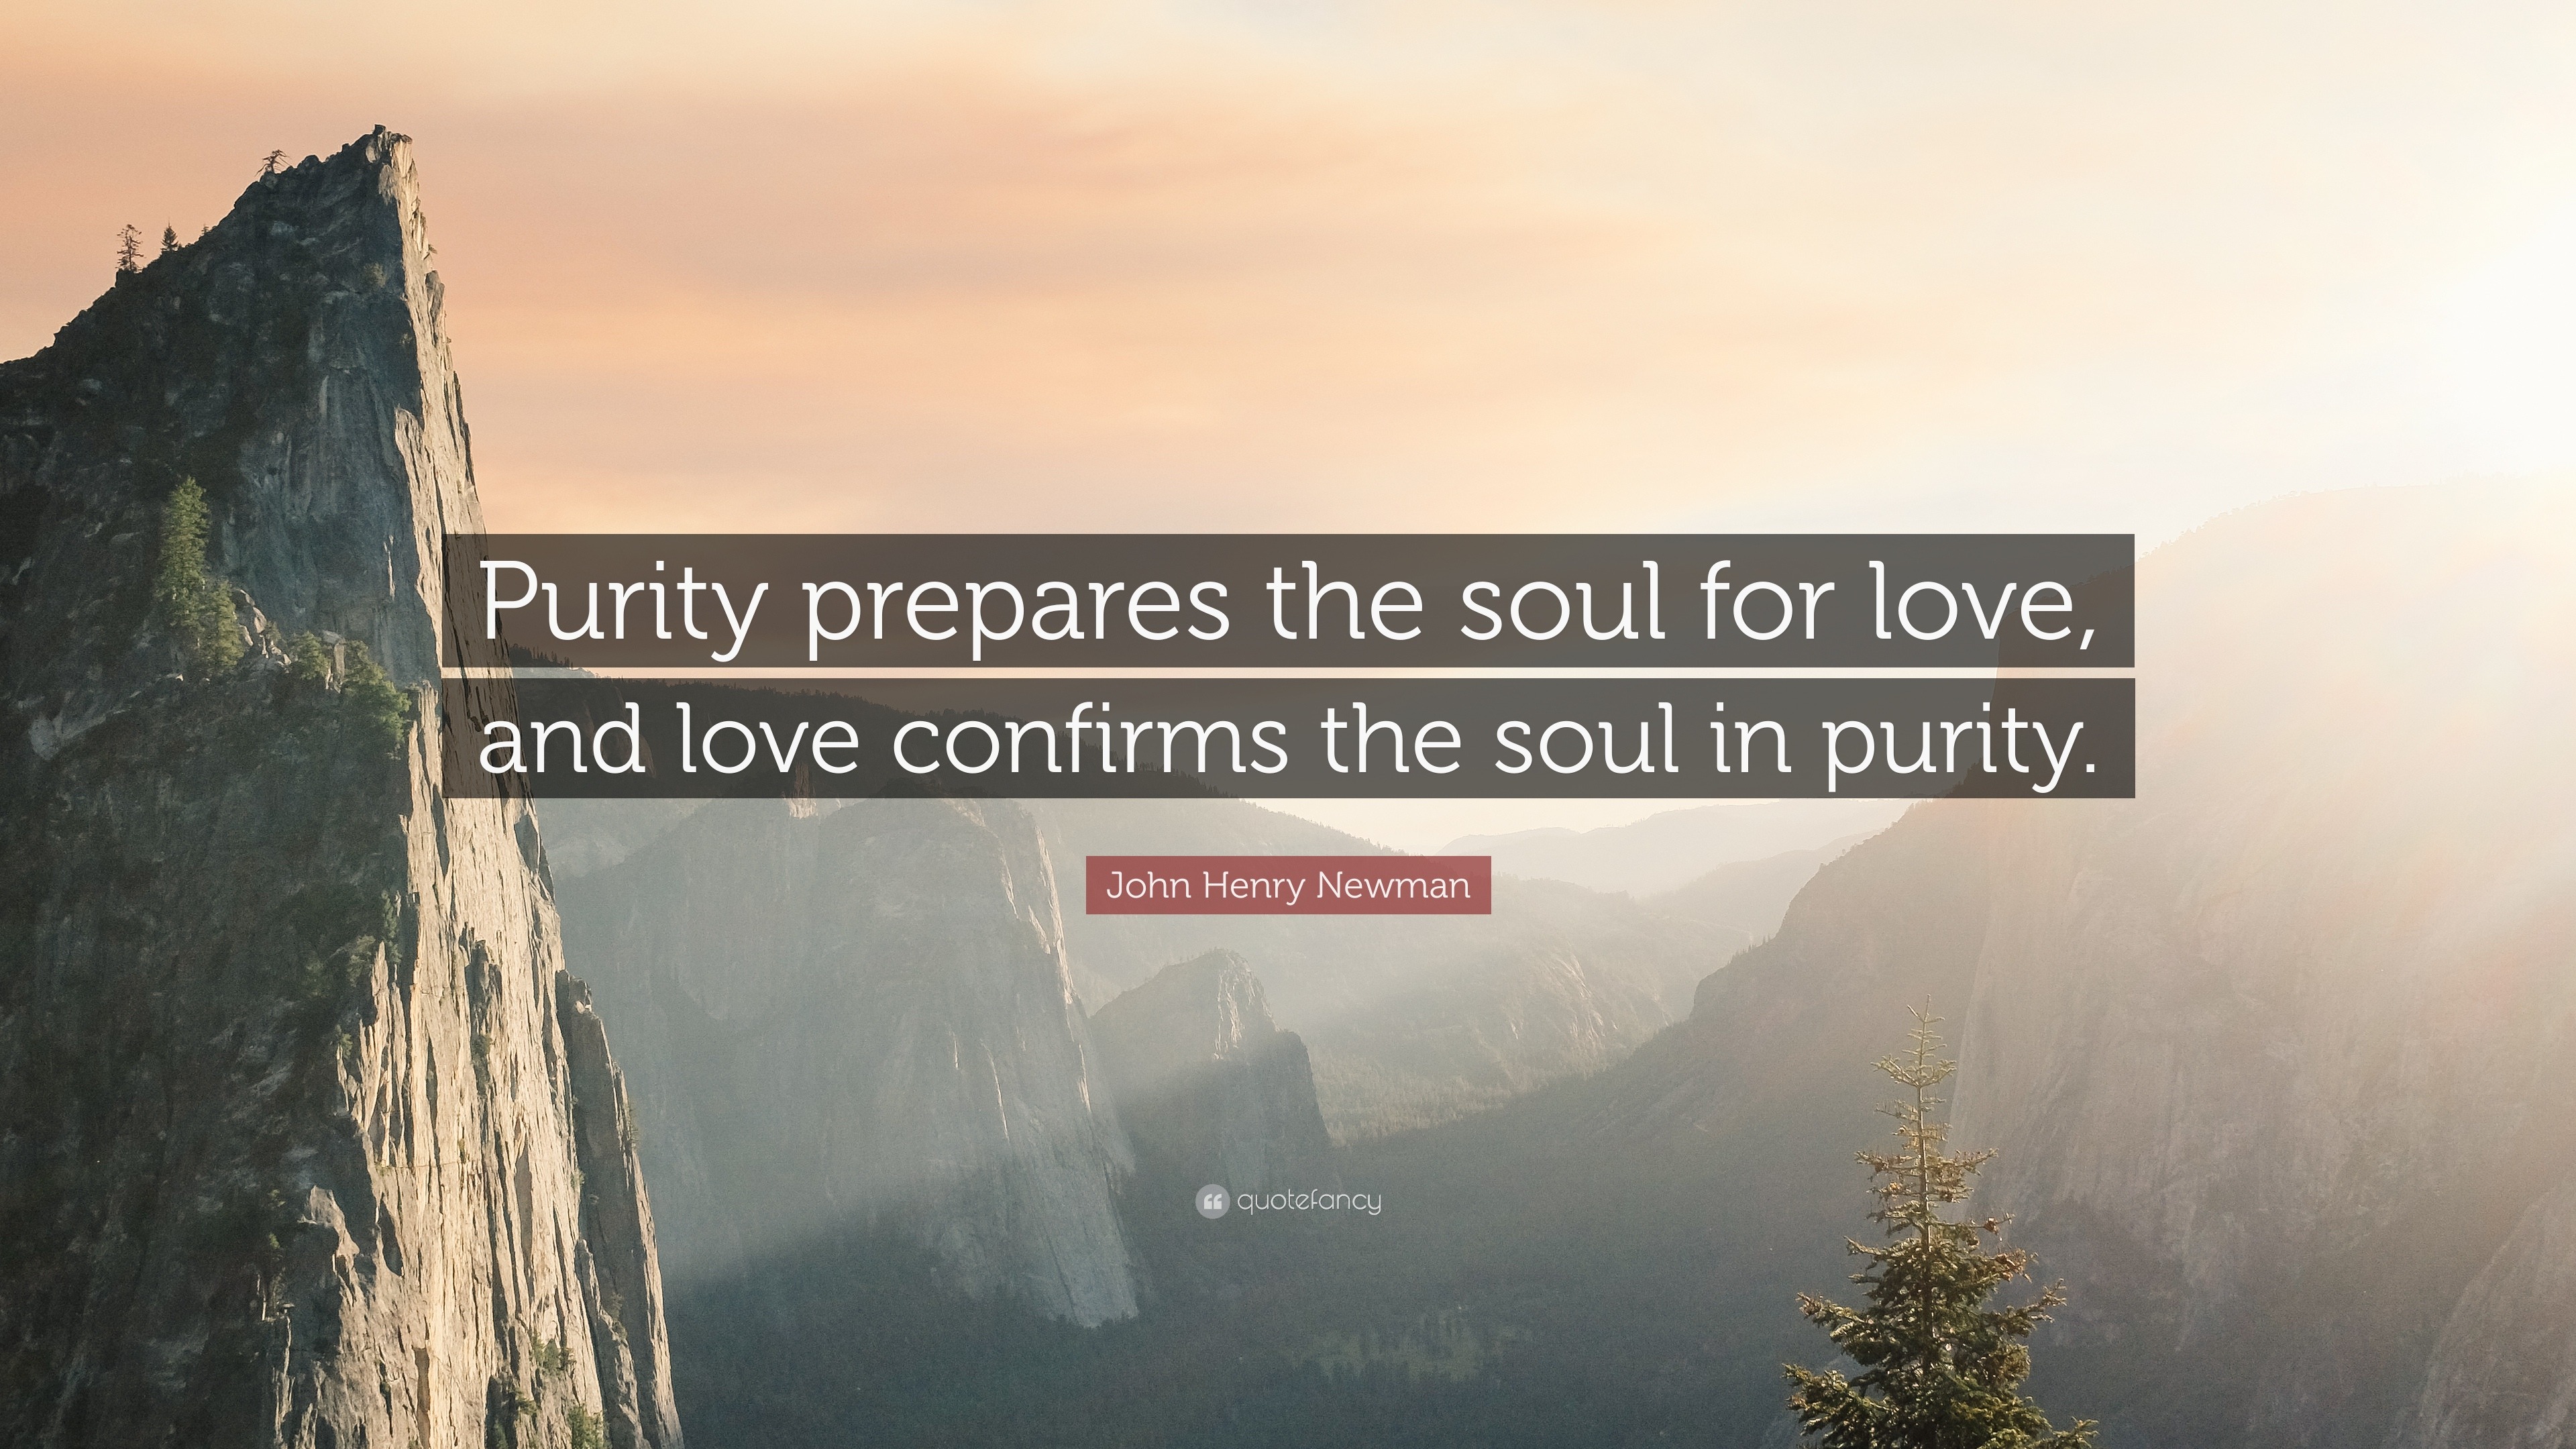 John Henry Newman Quote “purity Prepares The Soul For Love And Love